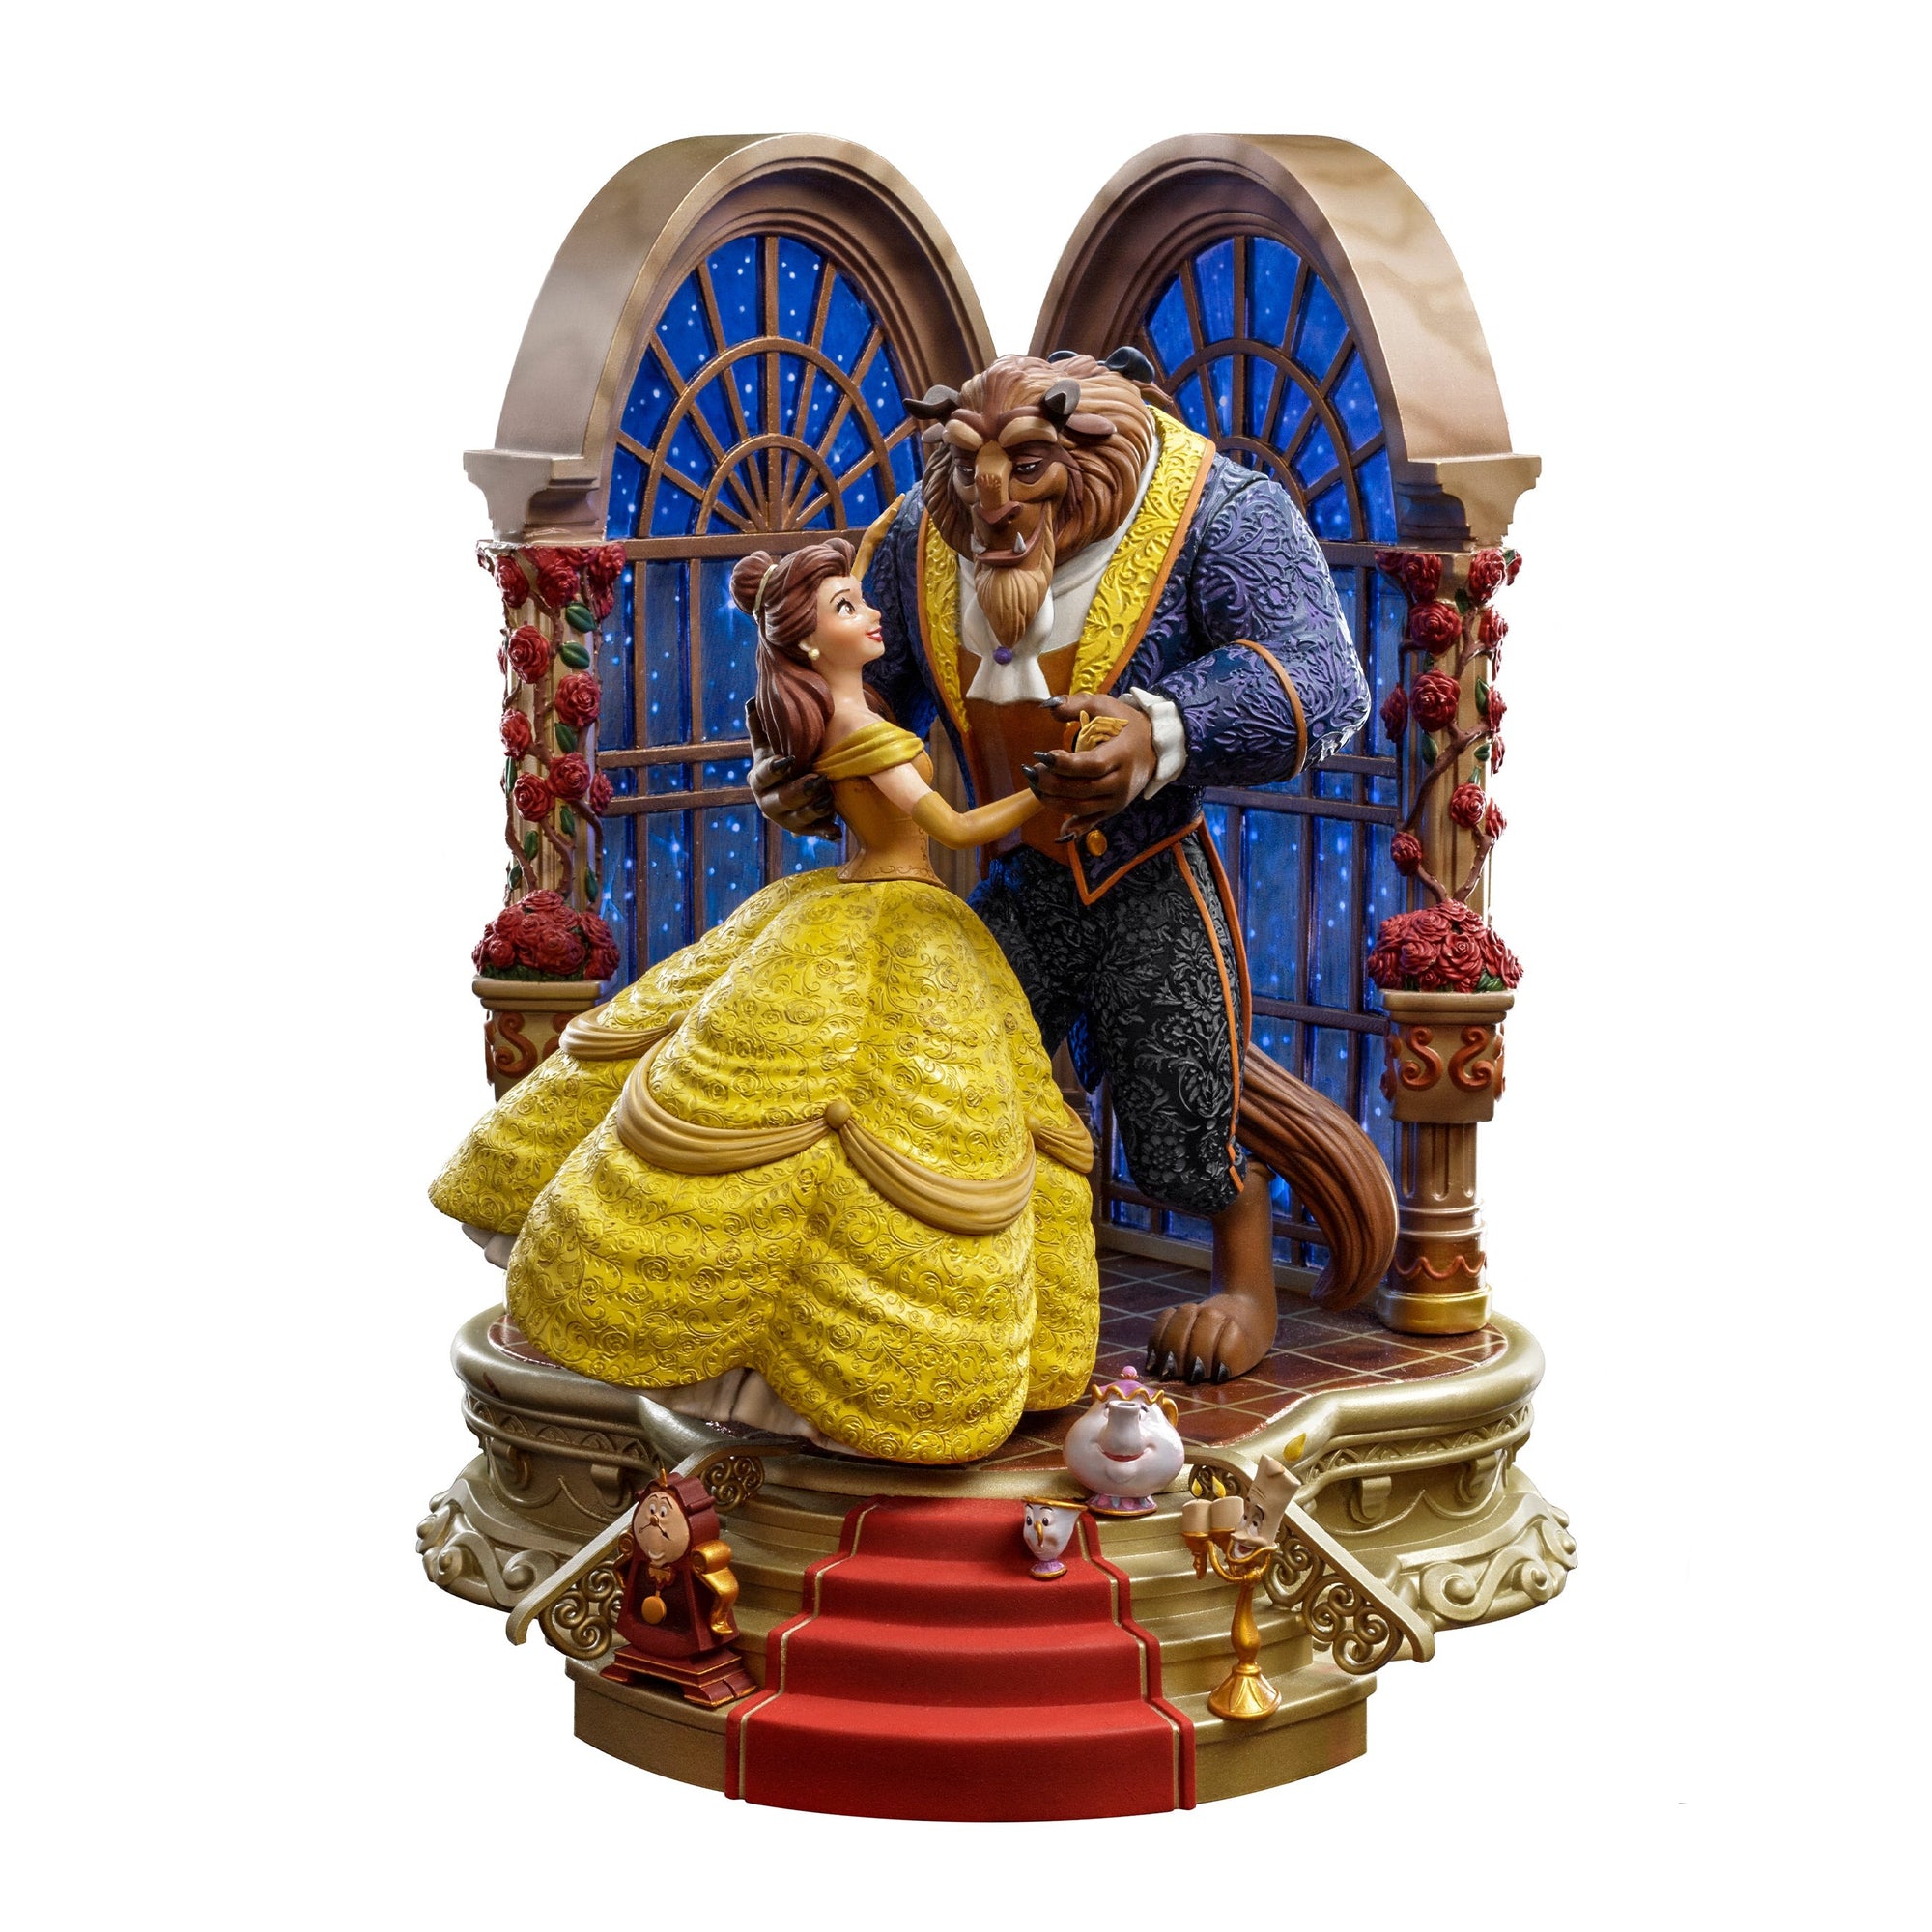 Beauty and the Beast Deluxe art scale 1/10 by Iron Studios -Iron Studios - India - www.superherotoystore.com